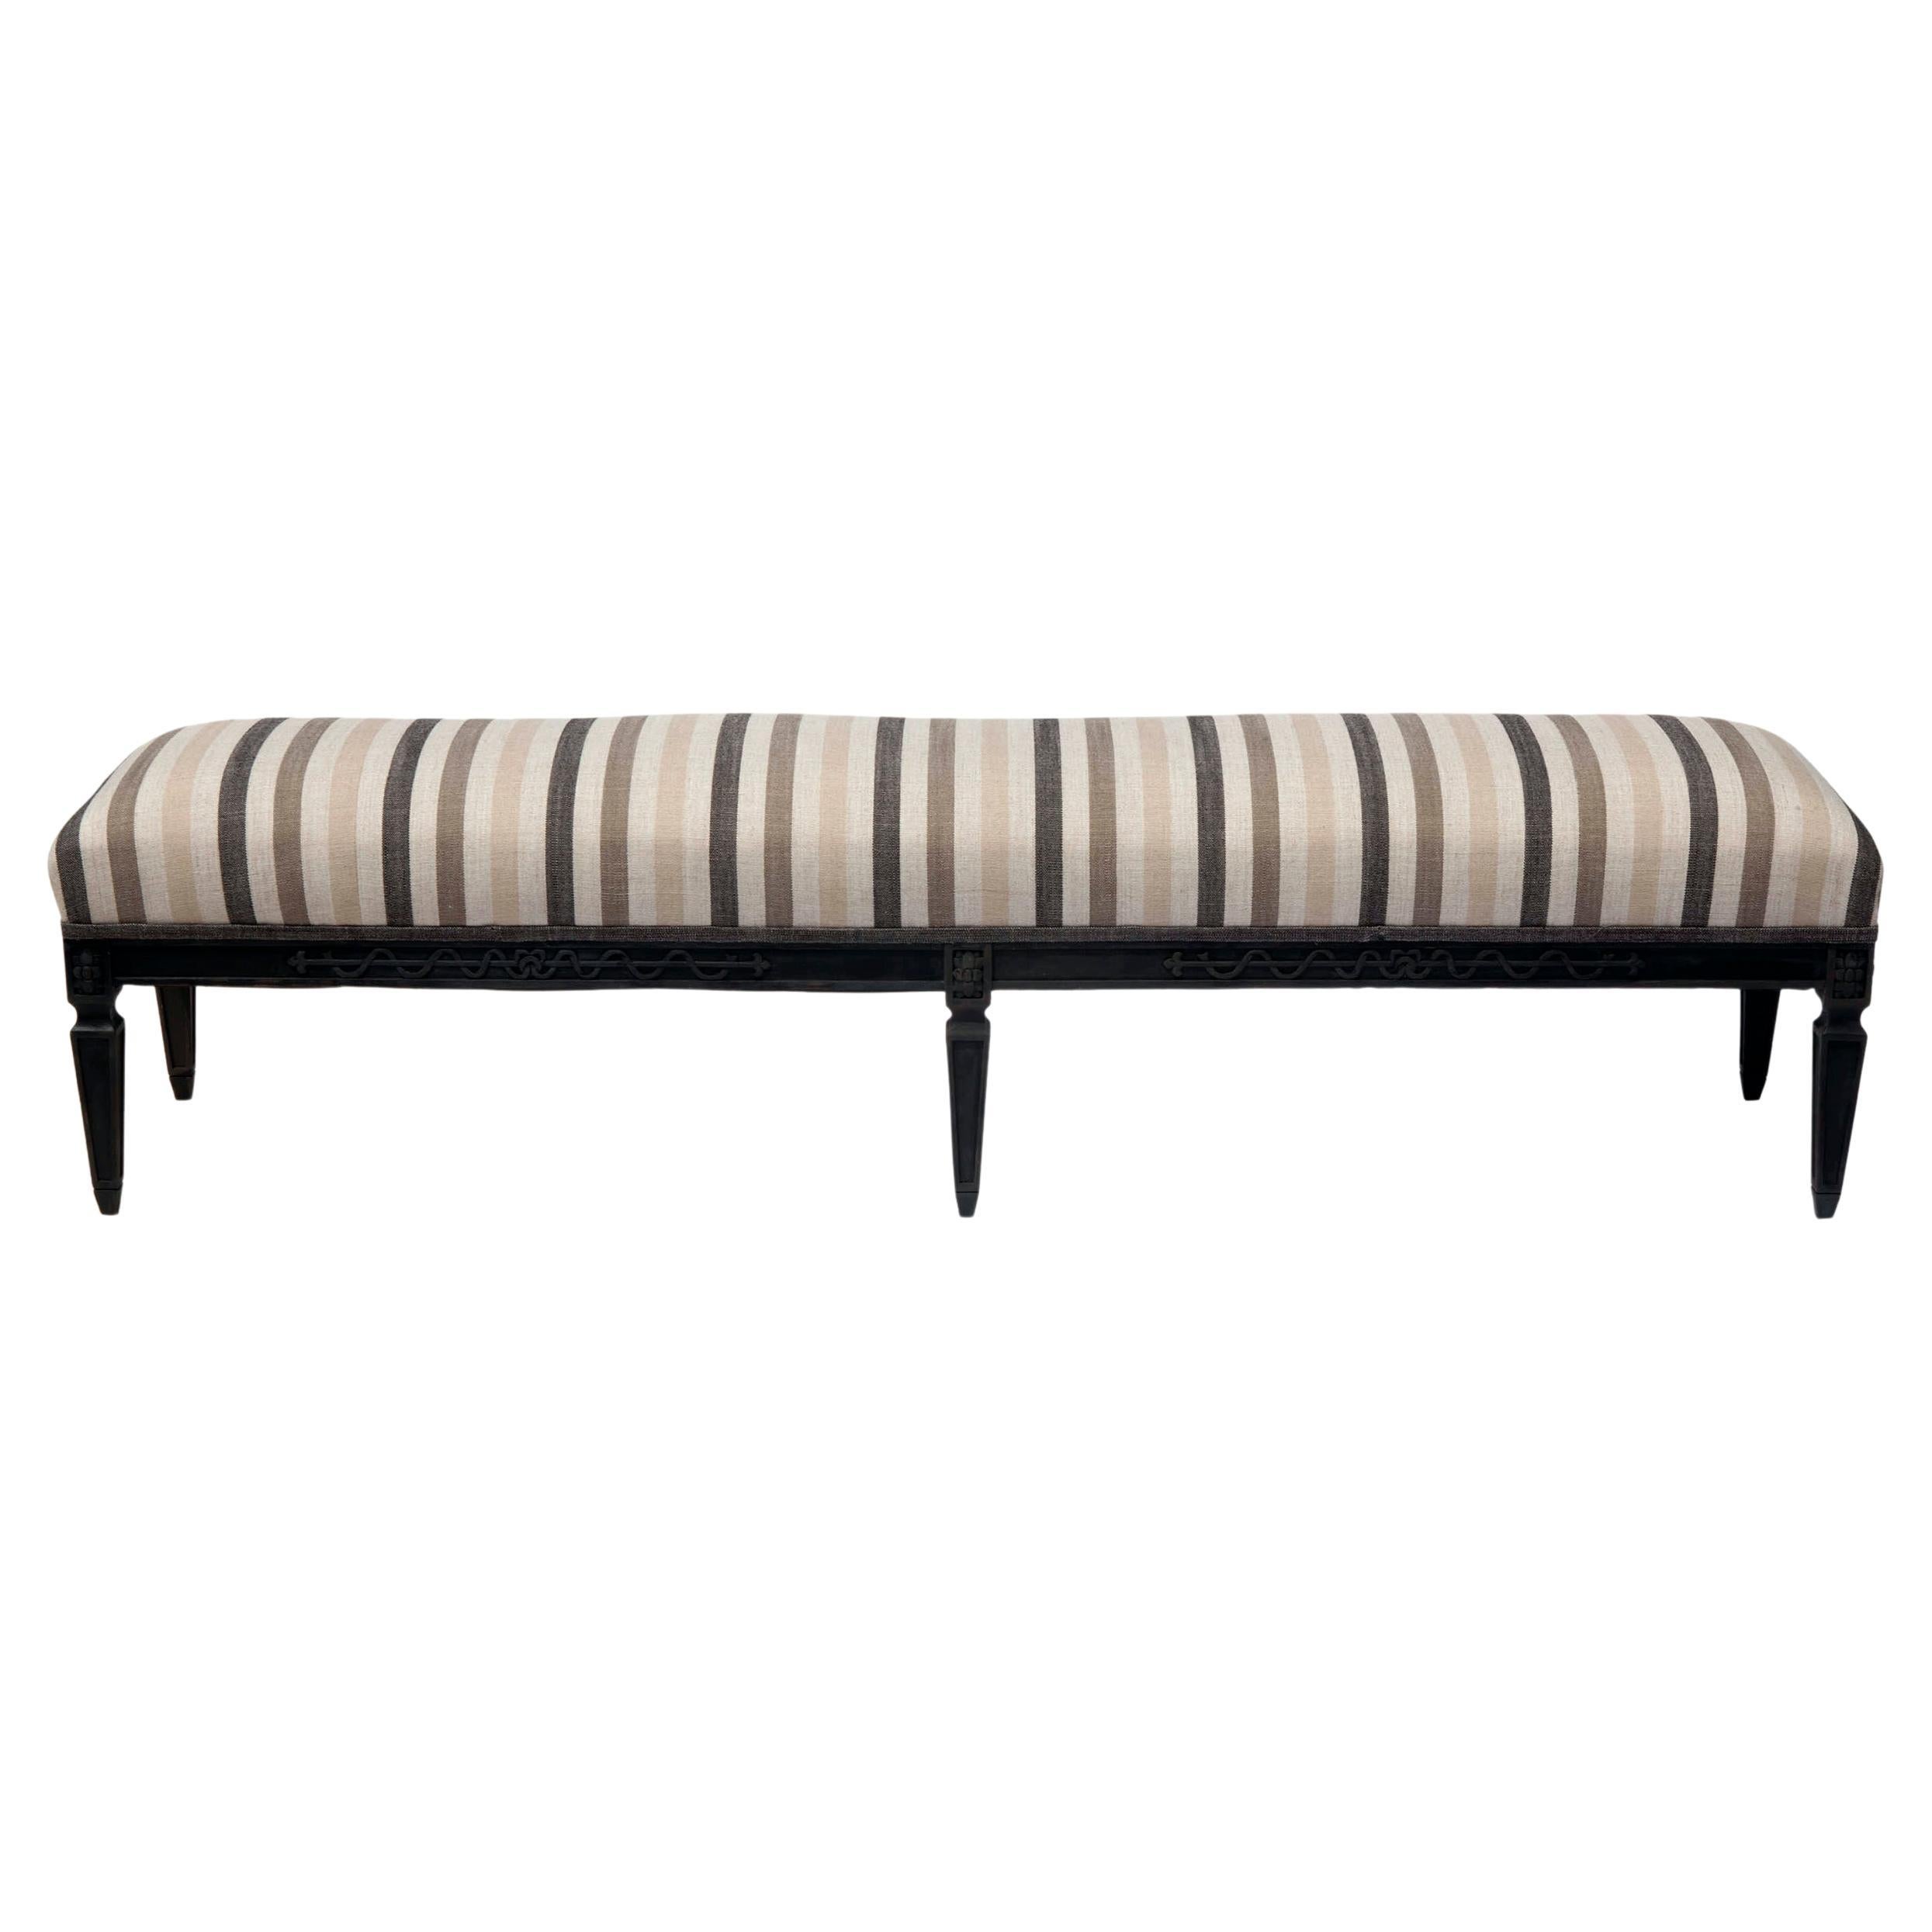 Hand carved Dutch bench with hand carved hardwood base. This piece is newly upholstered in Peggy Platner Italian linen has been completely rebuilt. 
New paint in shades of black & charcoal.